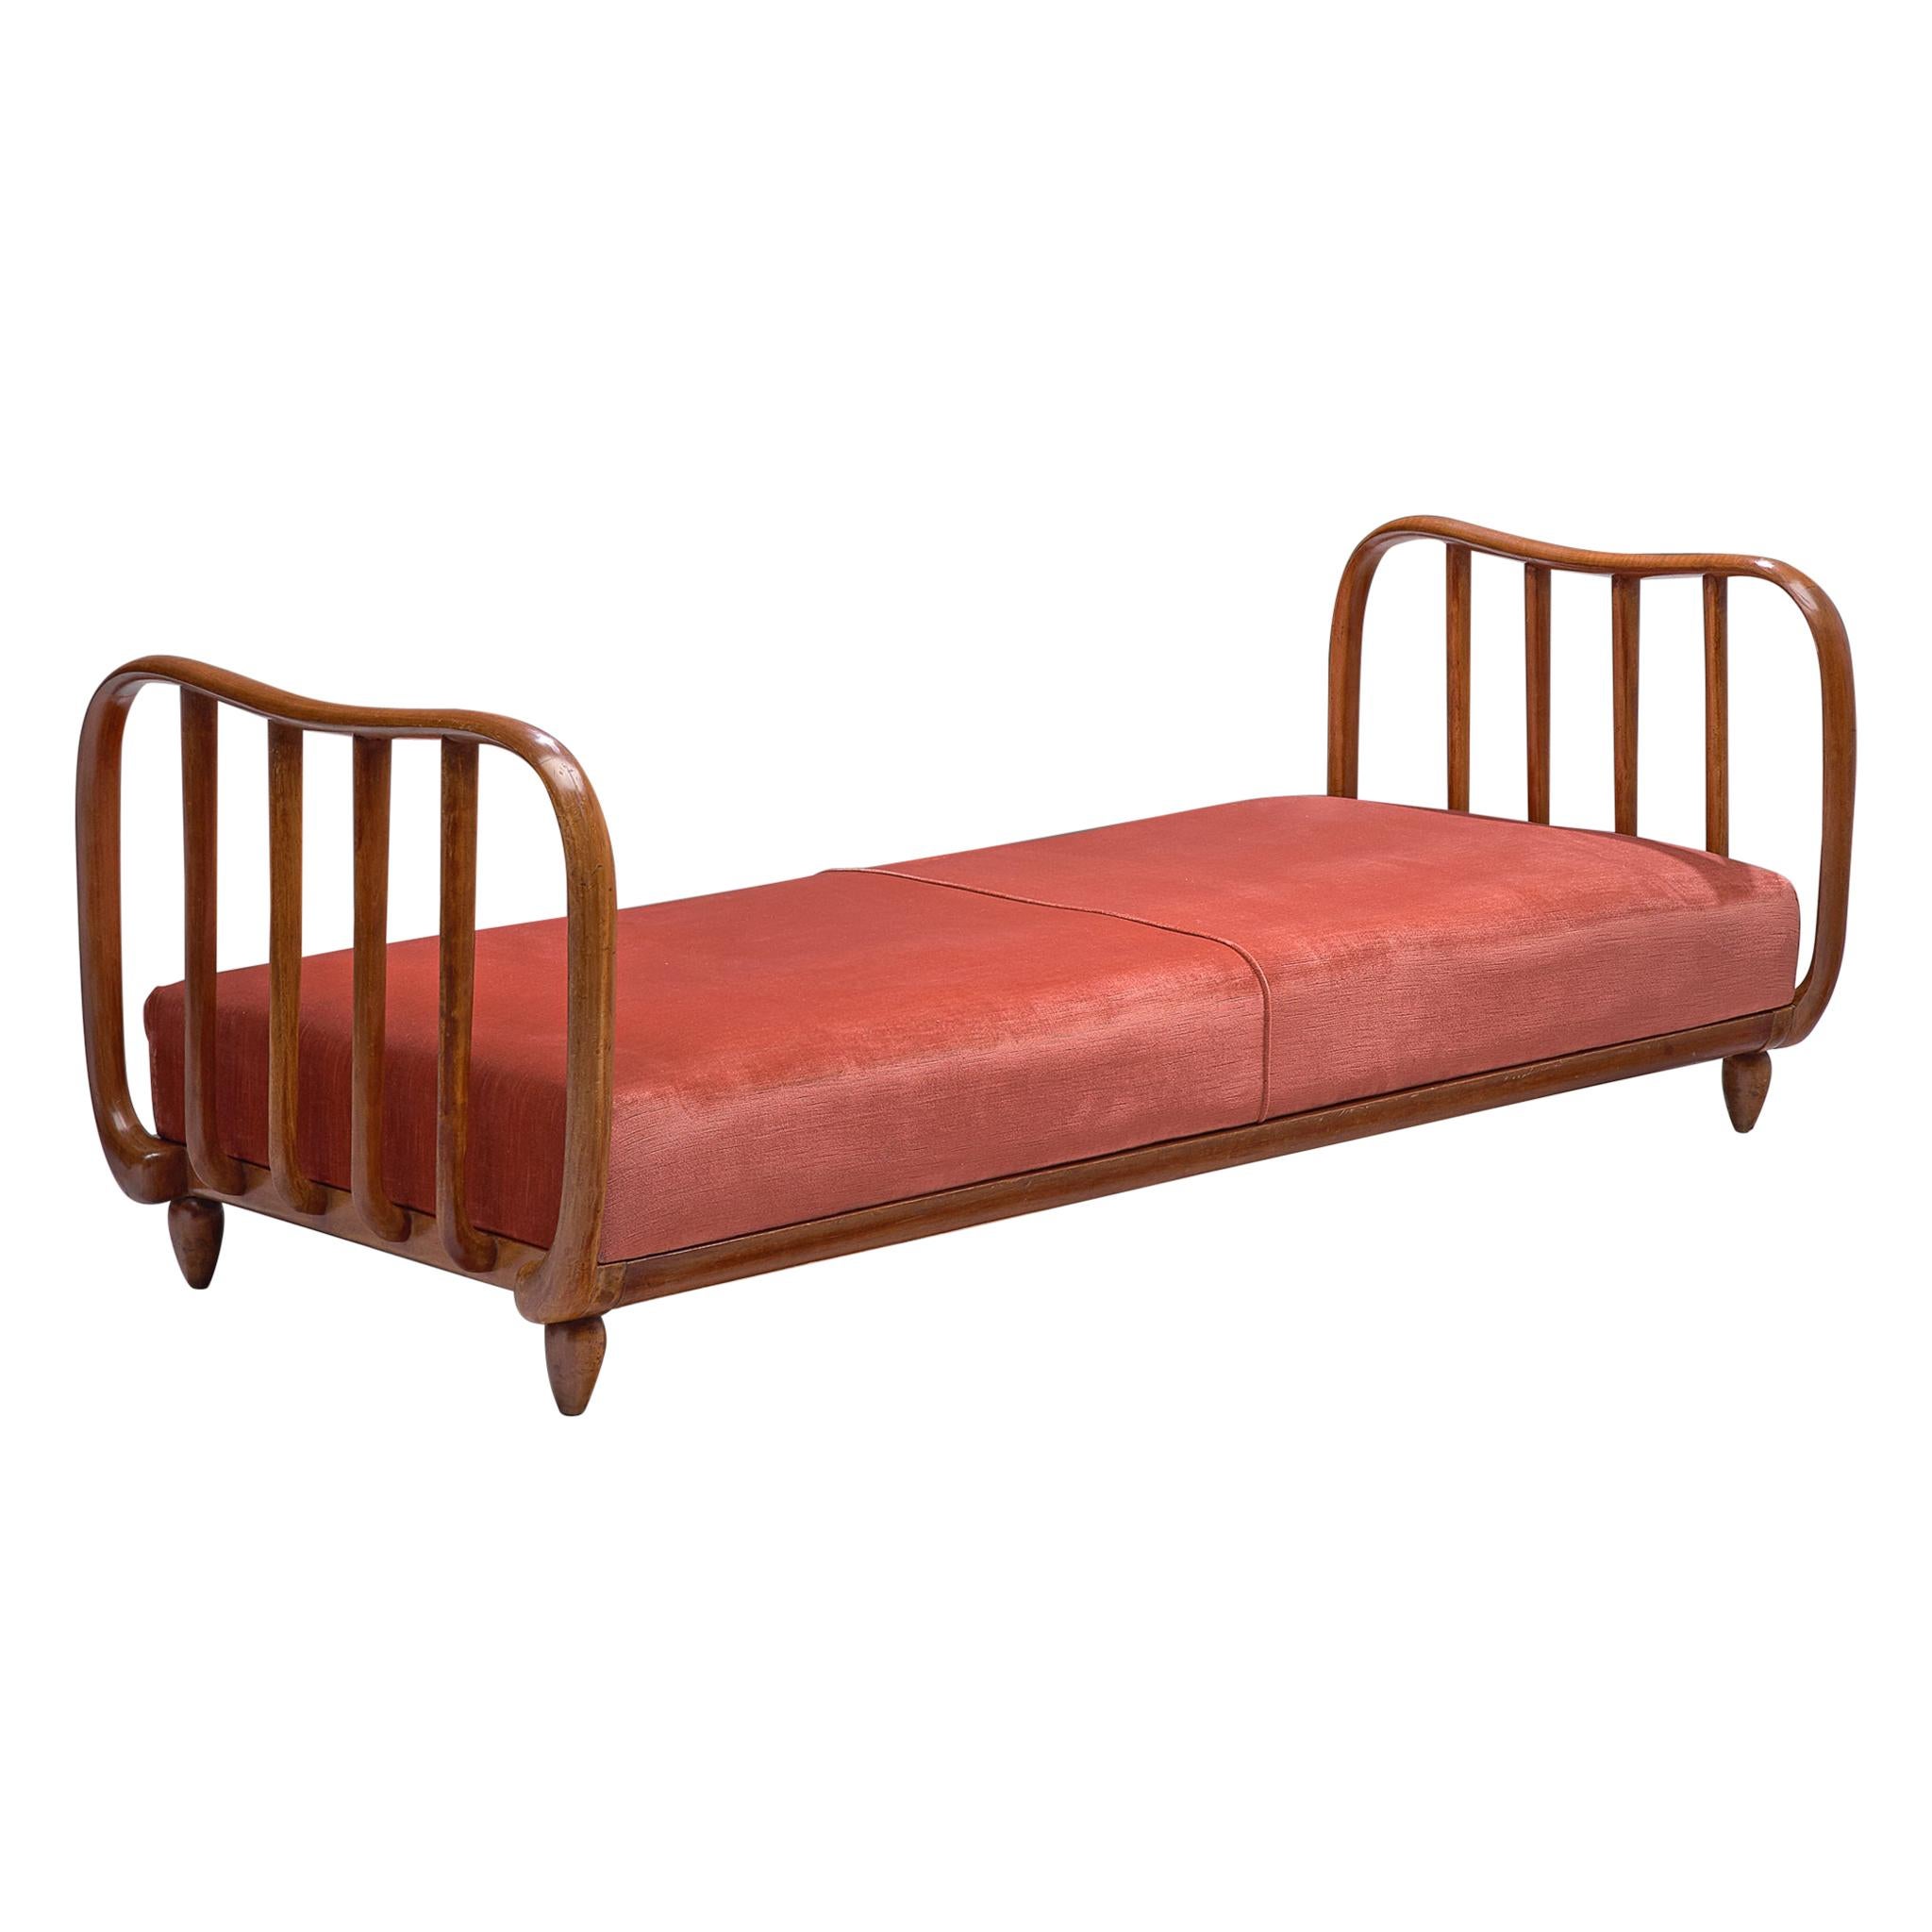 Italian Art Deco Daybed with Coral Upholstery, 1940s